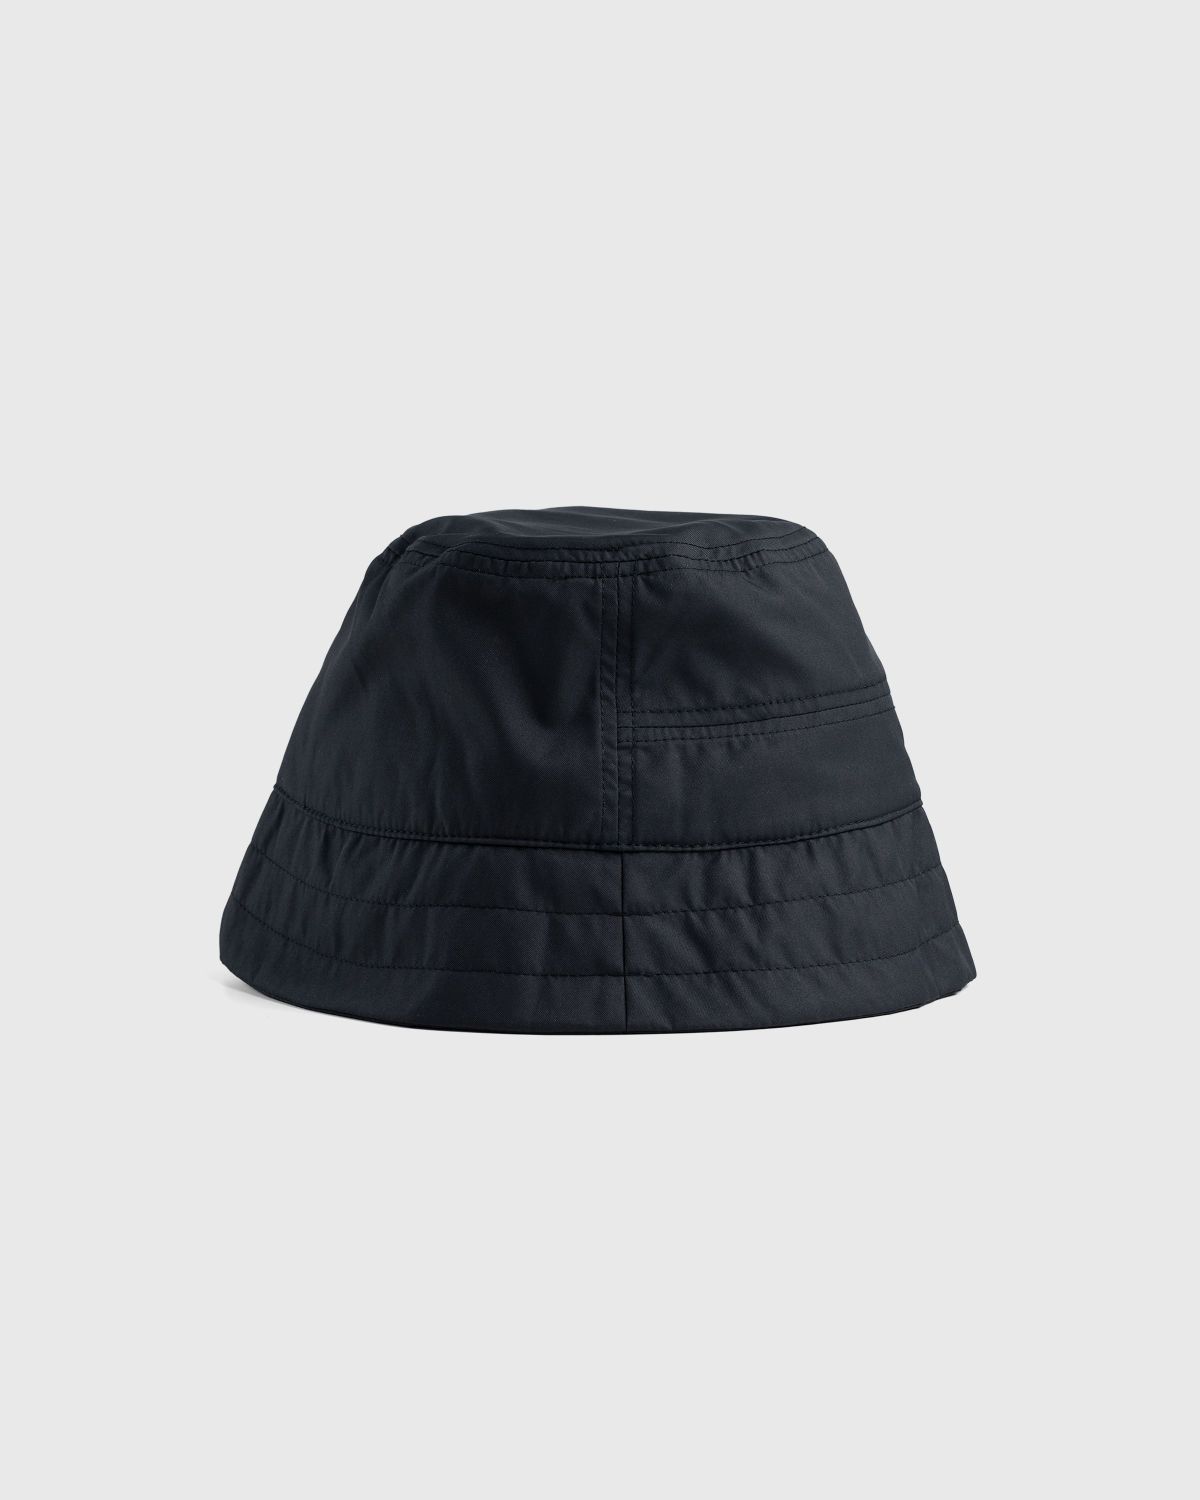 A-Cold-Wall* – Essential Bucket Hat Black - Hats - Black - Image 2